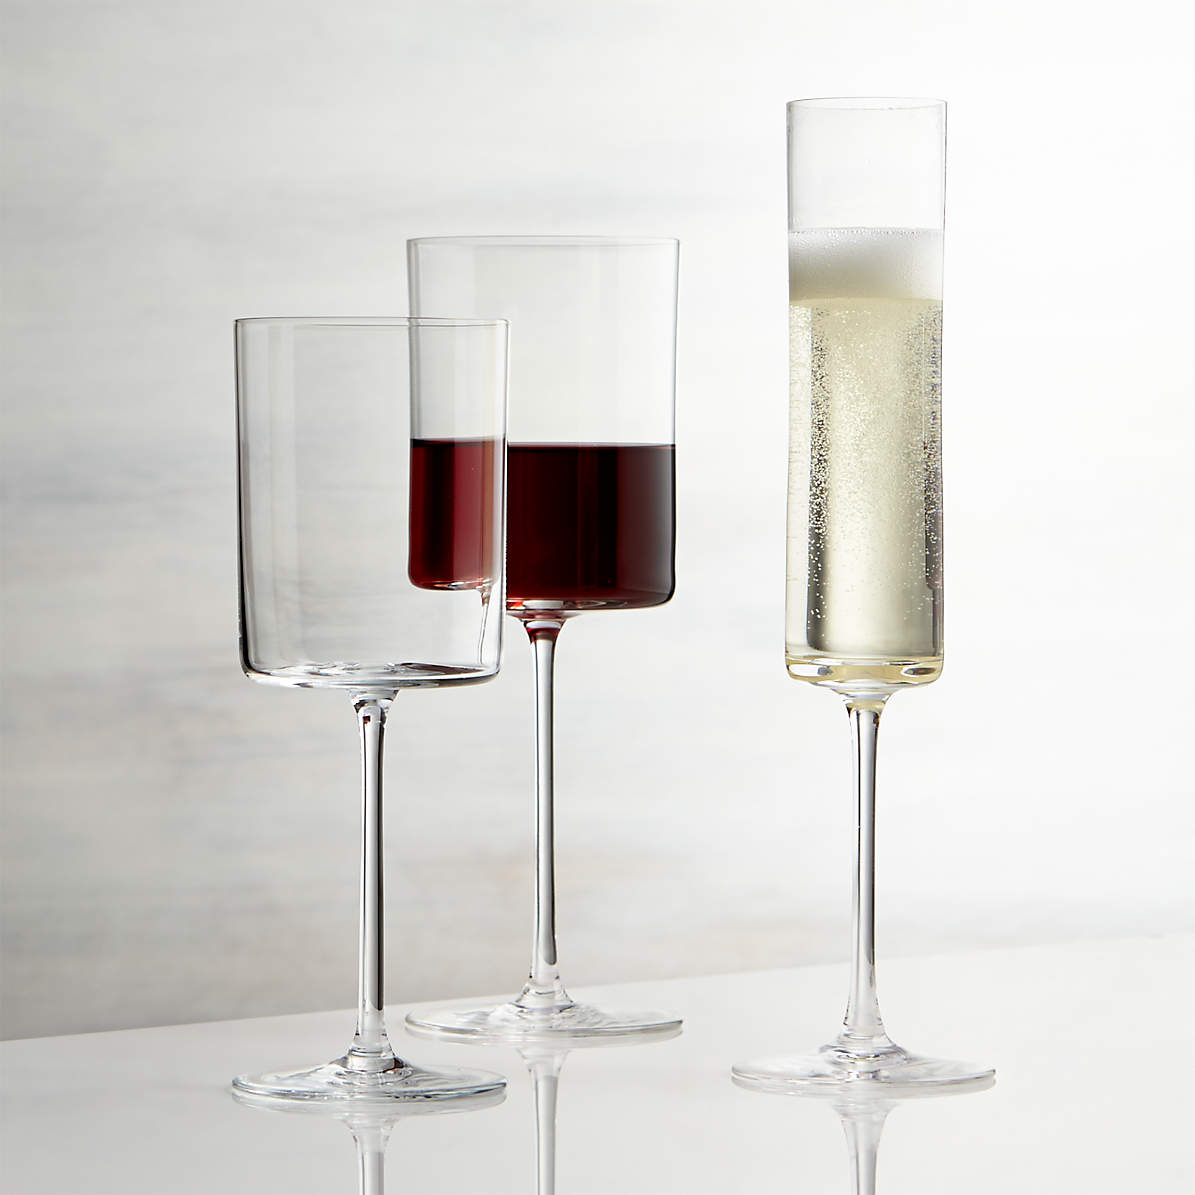 These Stable Wine Glasses Have 2 Legs & a Straw